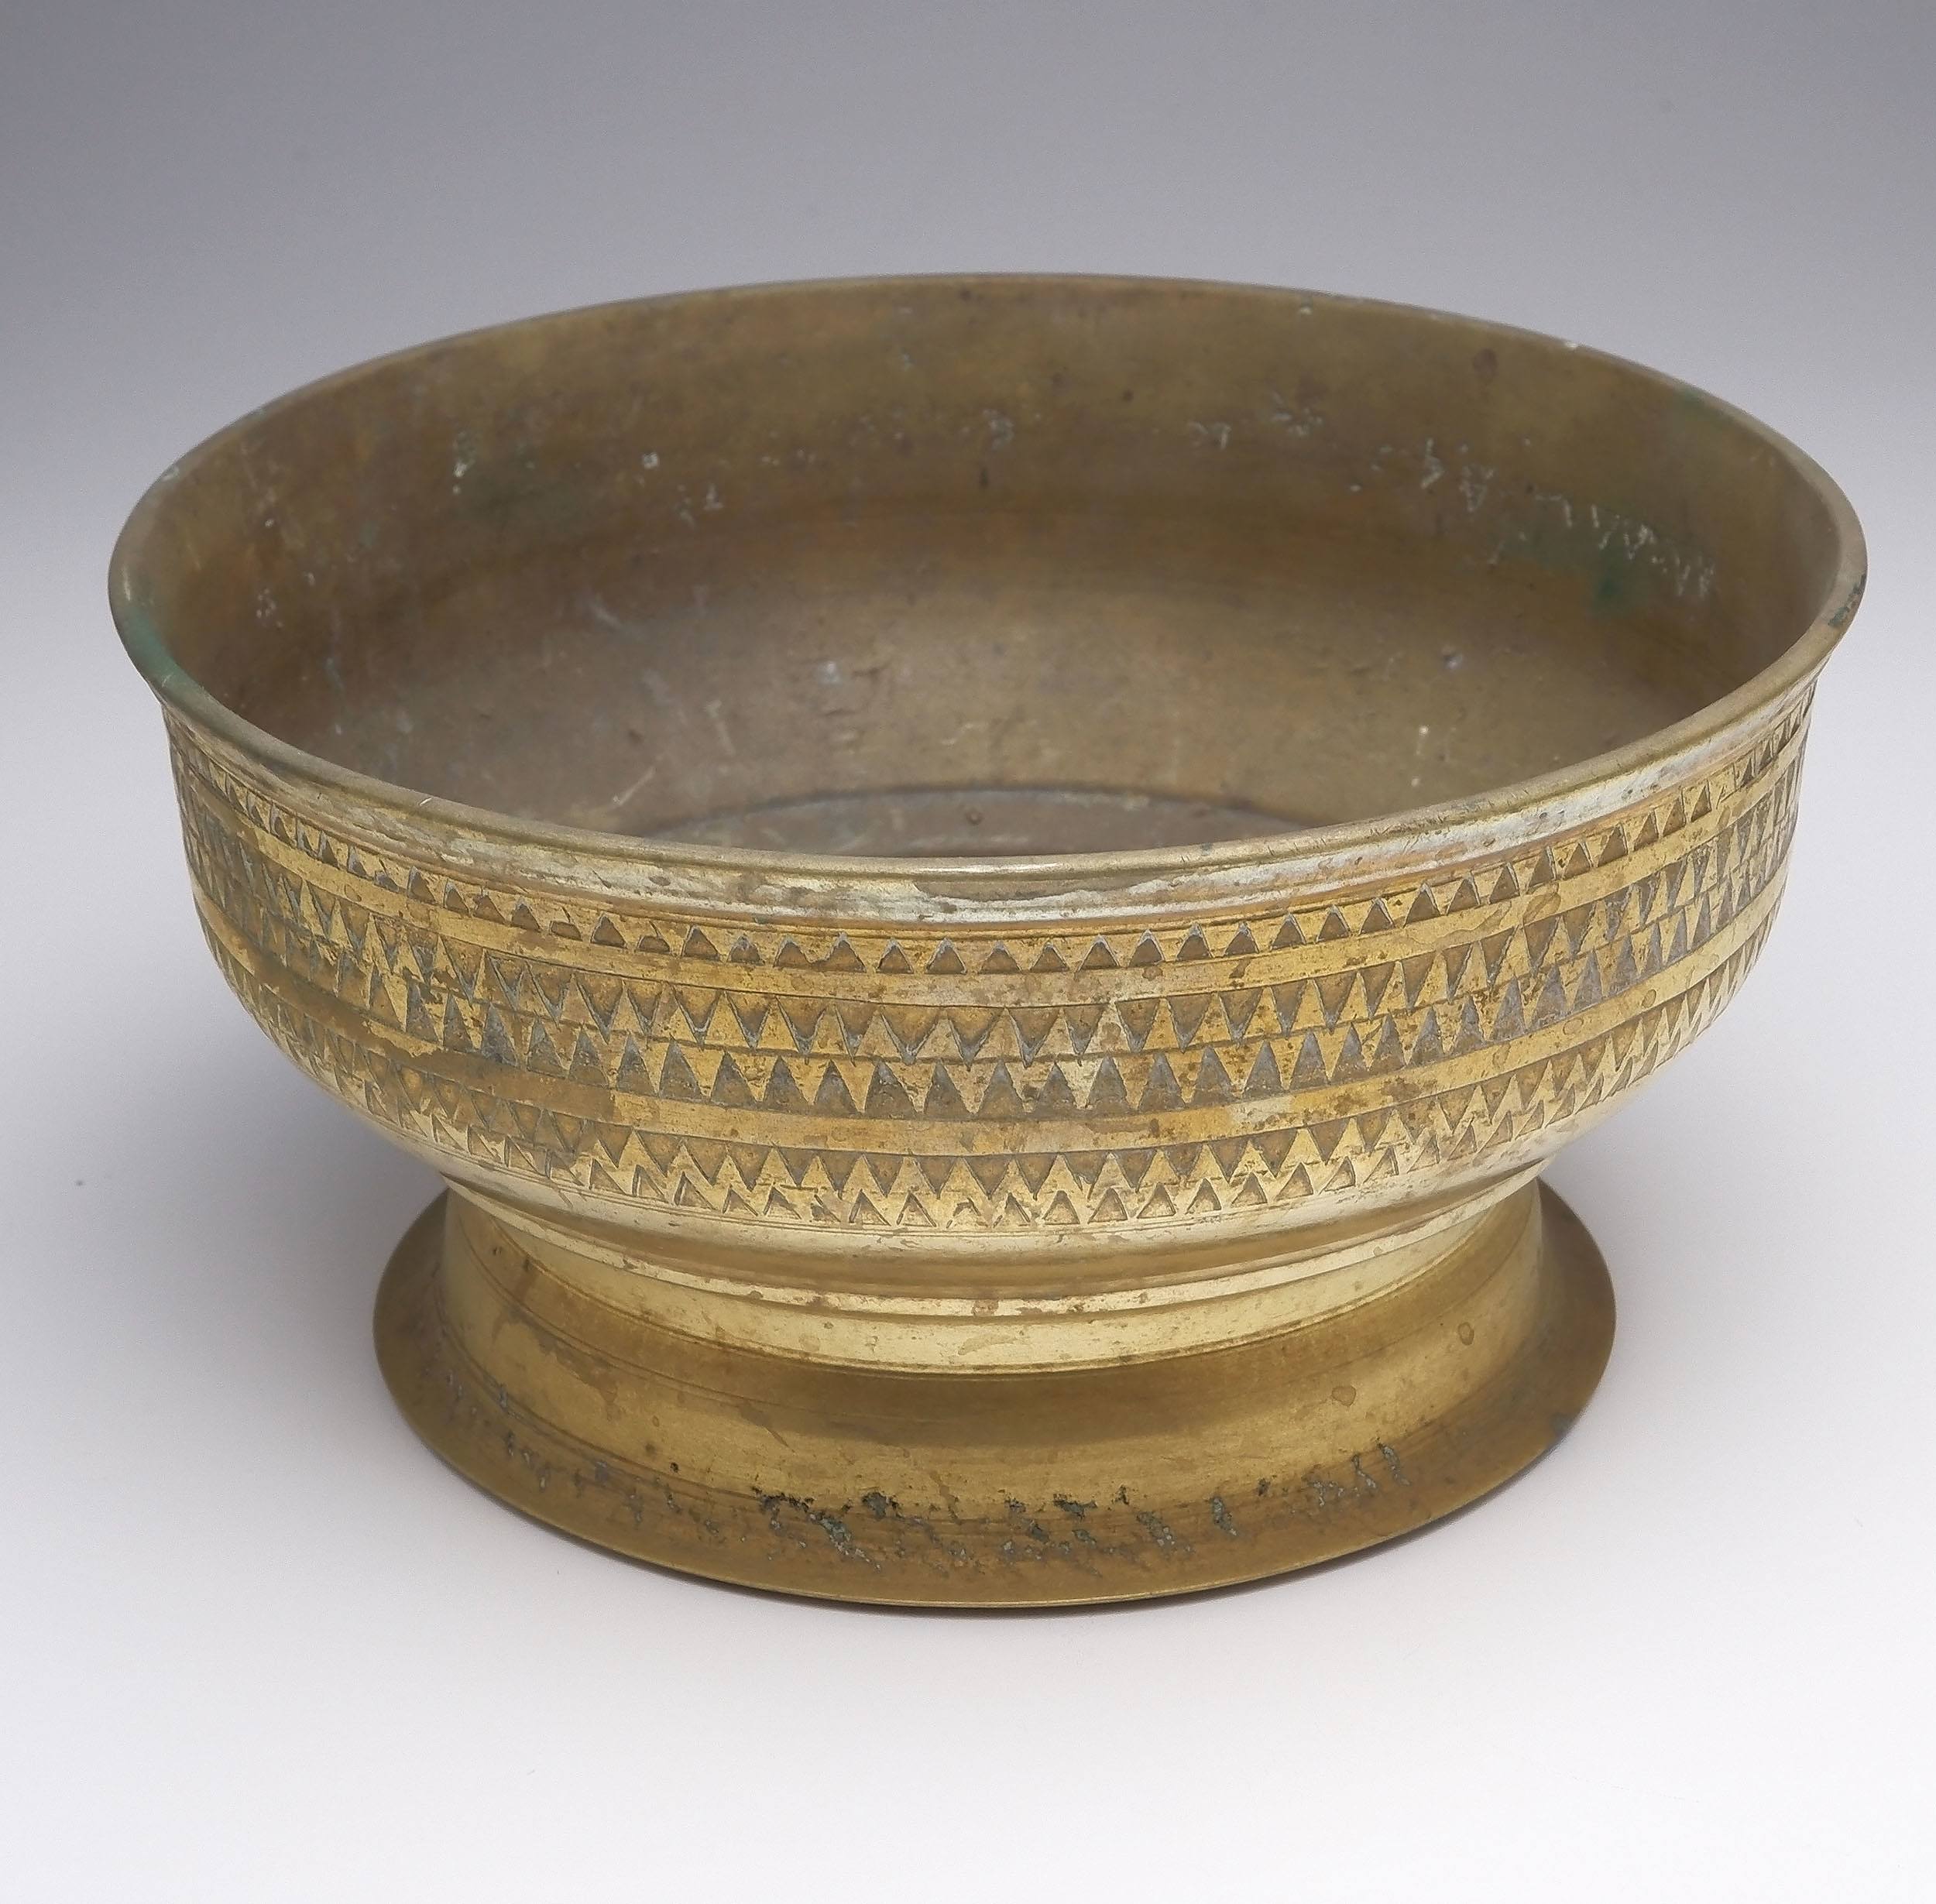 'Near Pair of Antique Indo-Persian Cast Brass Footed Bowls with Geometric Border Patterns'